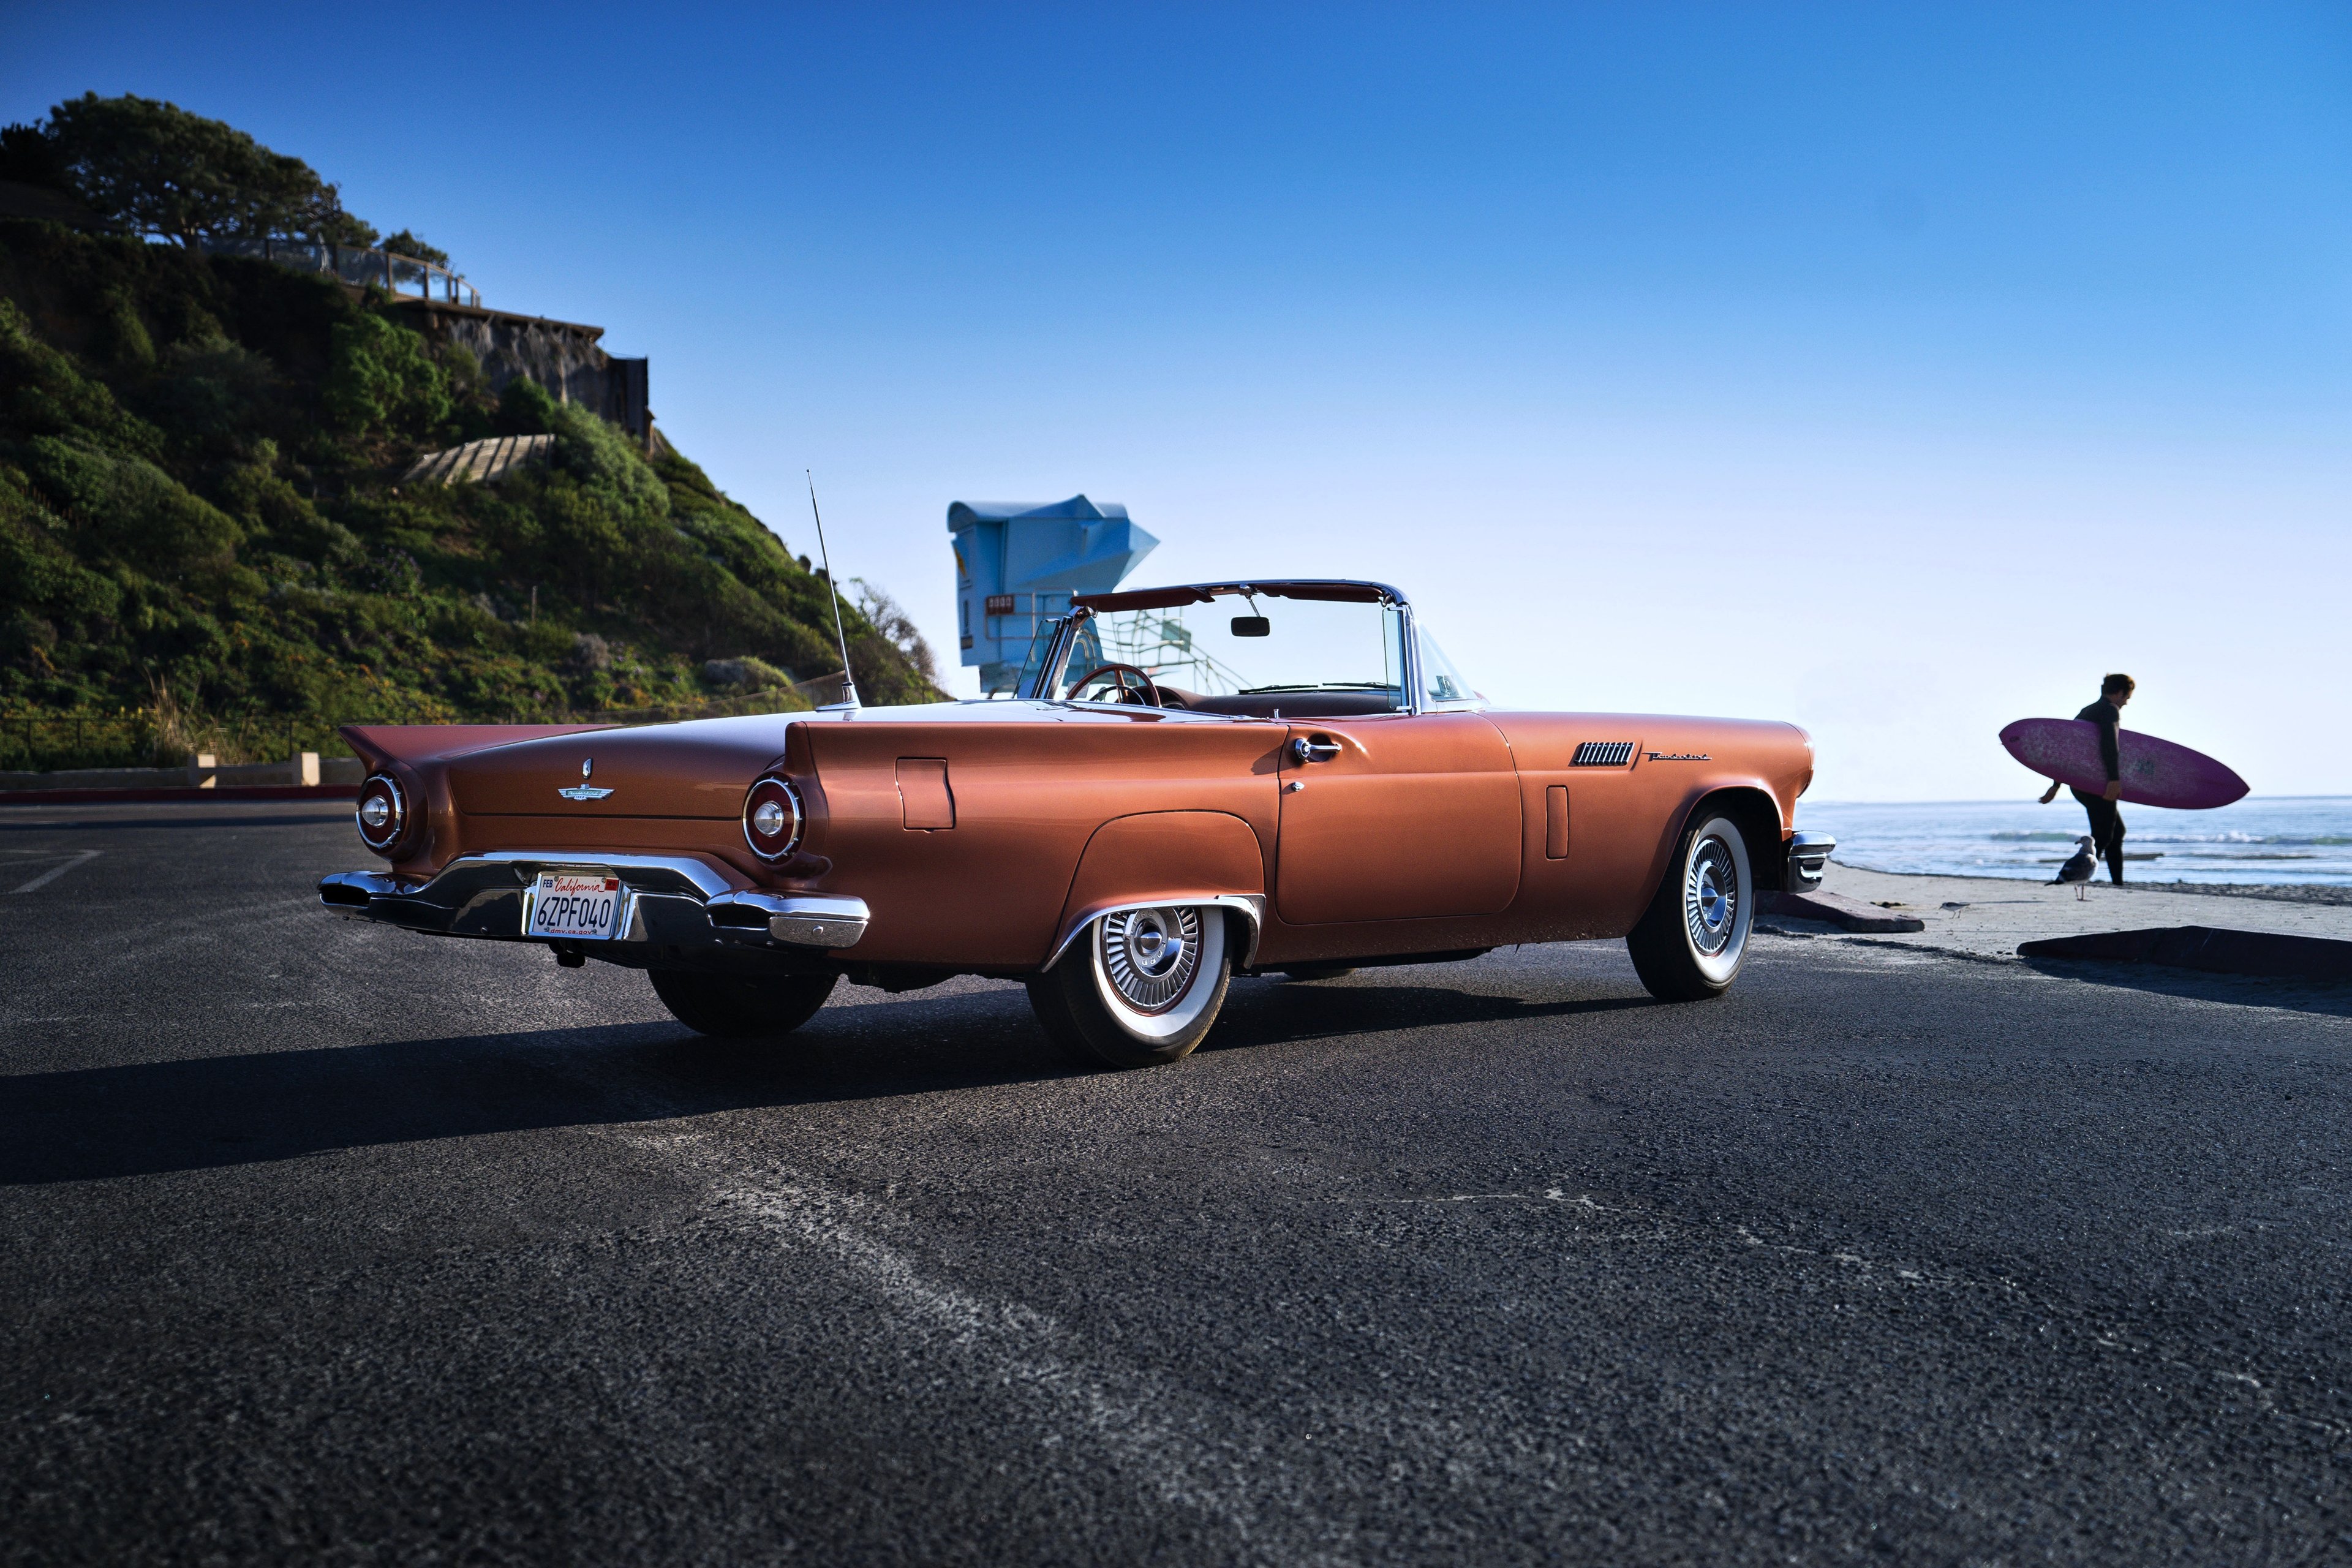 1957, Thunderbird, T bird, Special, Supercharged, Ford, Thunderbird, Classic, Road, Cars, Old, Beaches, Landscape, Sea Wallpaper